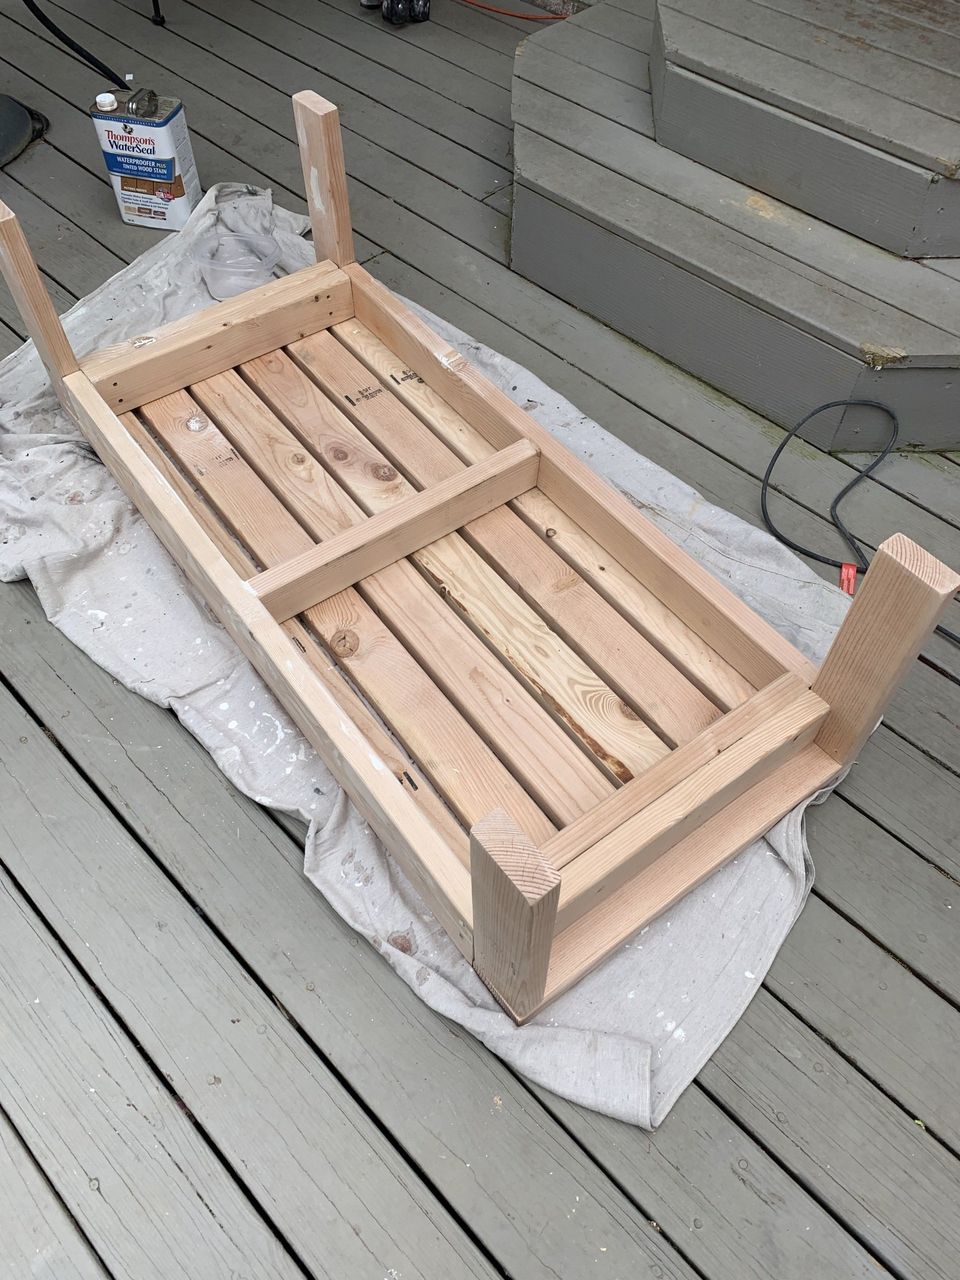 Sanding outdoor coffee table and sealing with Thompson's water seal and stain